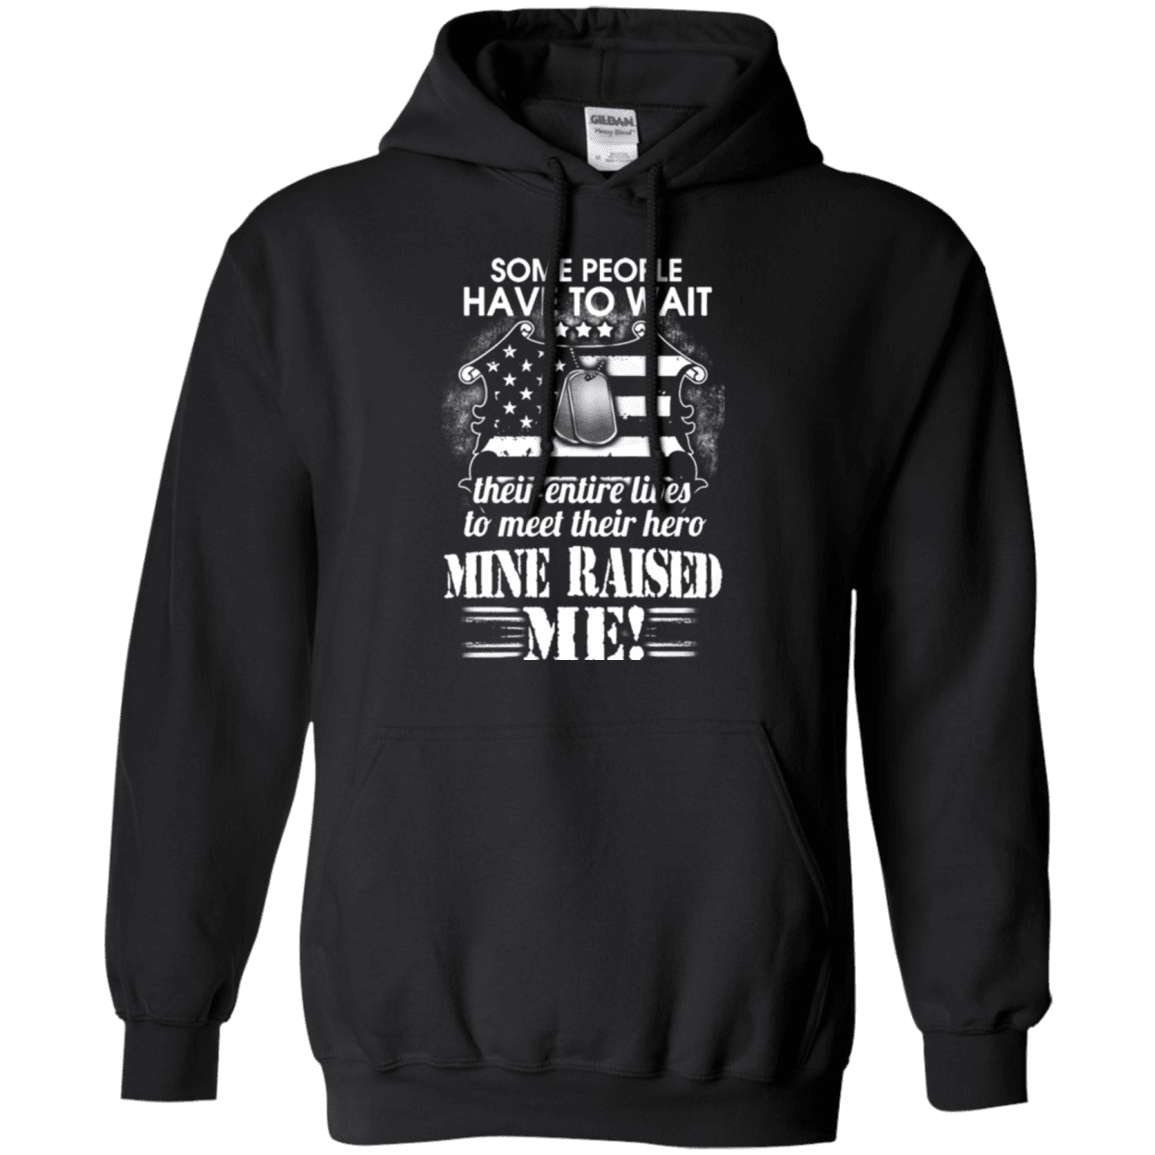 Military T-Shirt "SOME PEOPLE HAVE TO WAIT THEIR HERO MINE RAISED ME"-TShirt-General-Veterans Nation